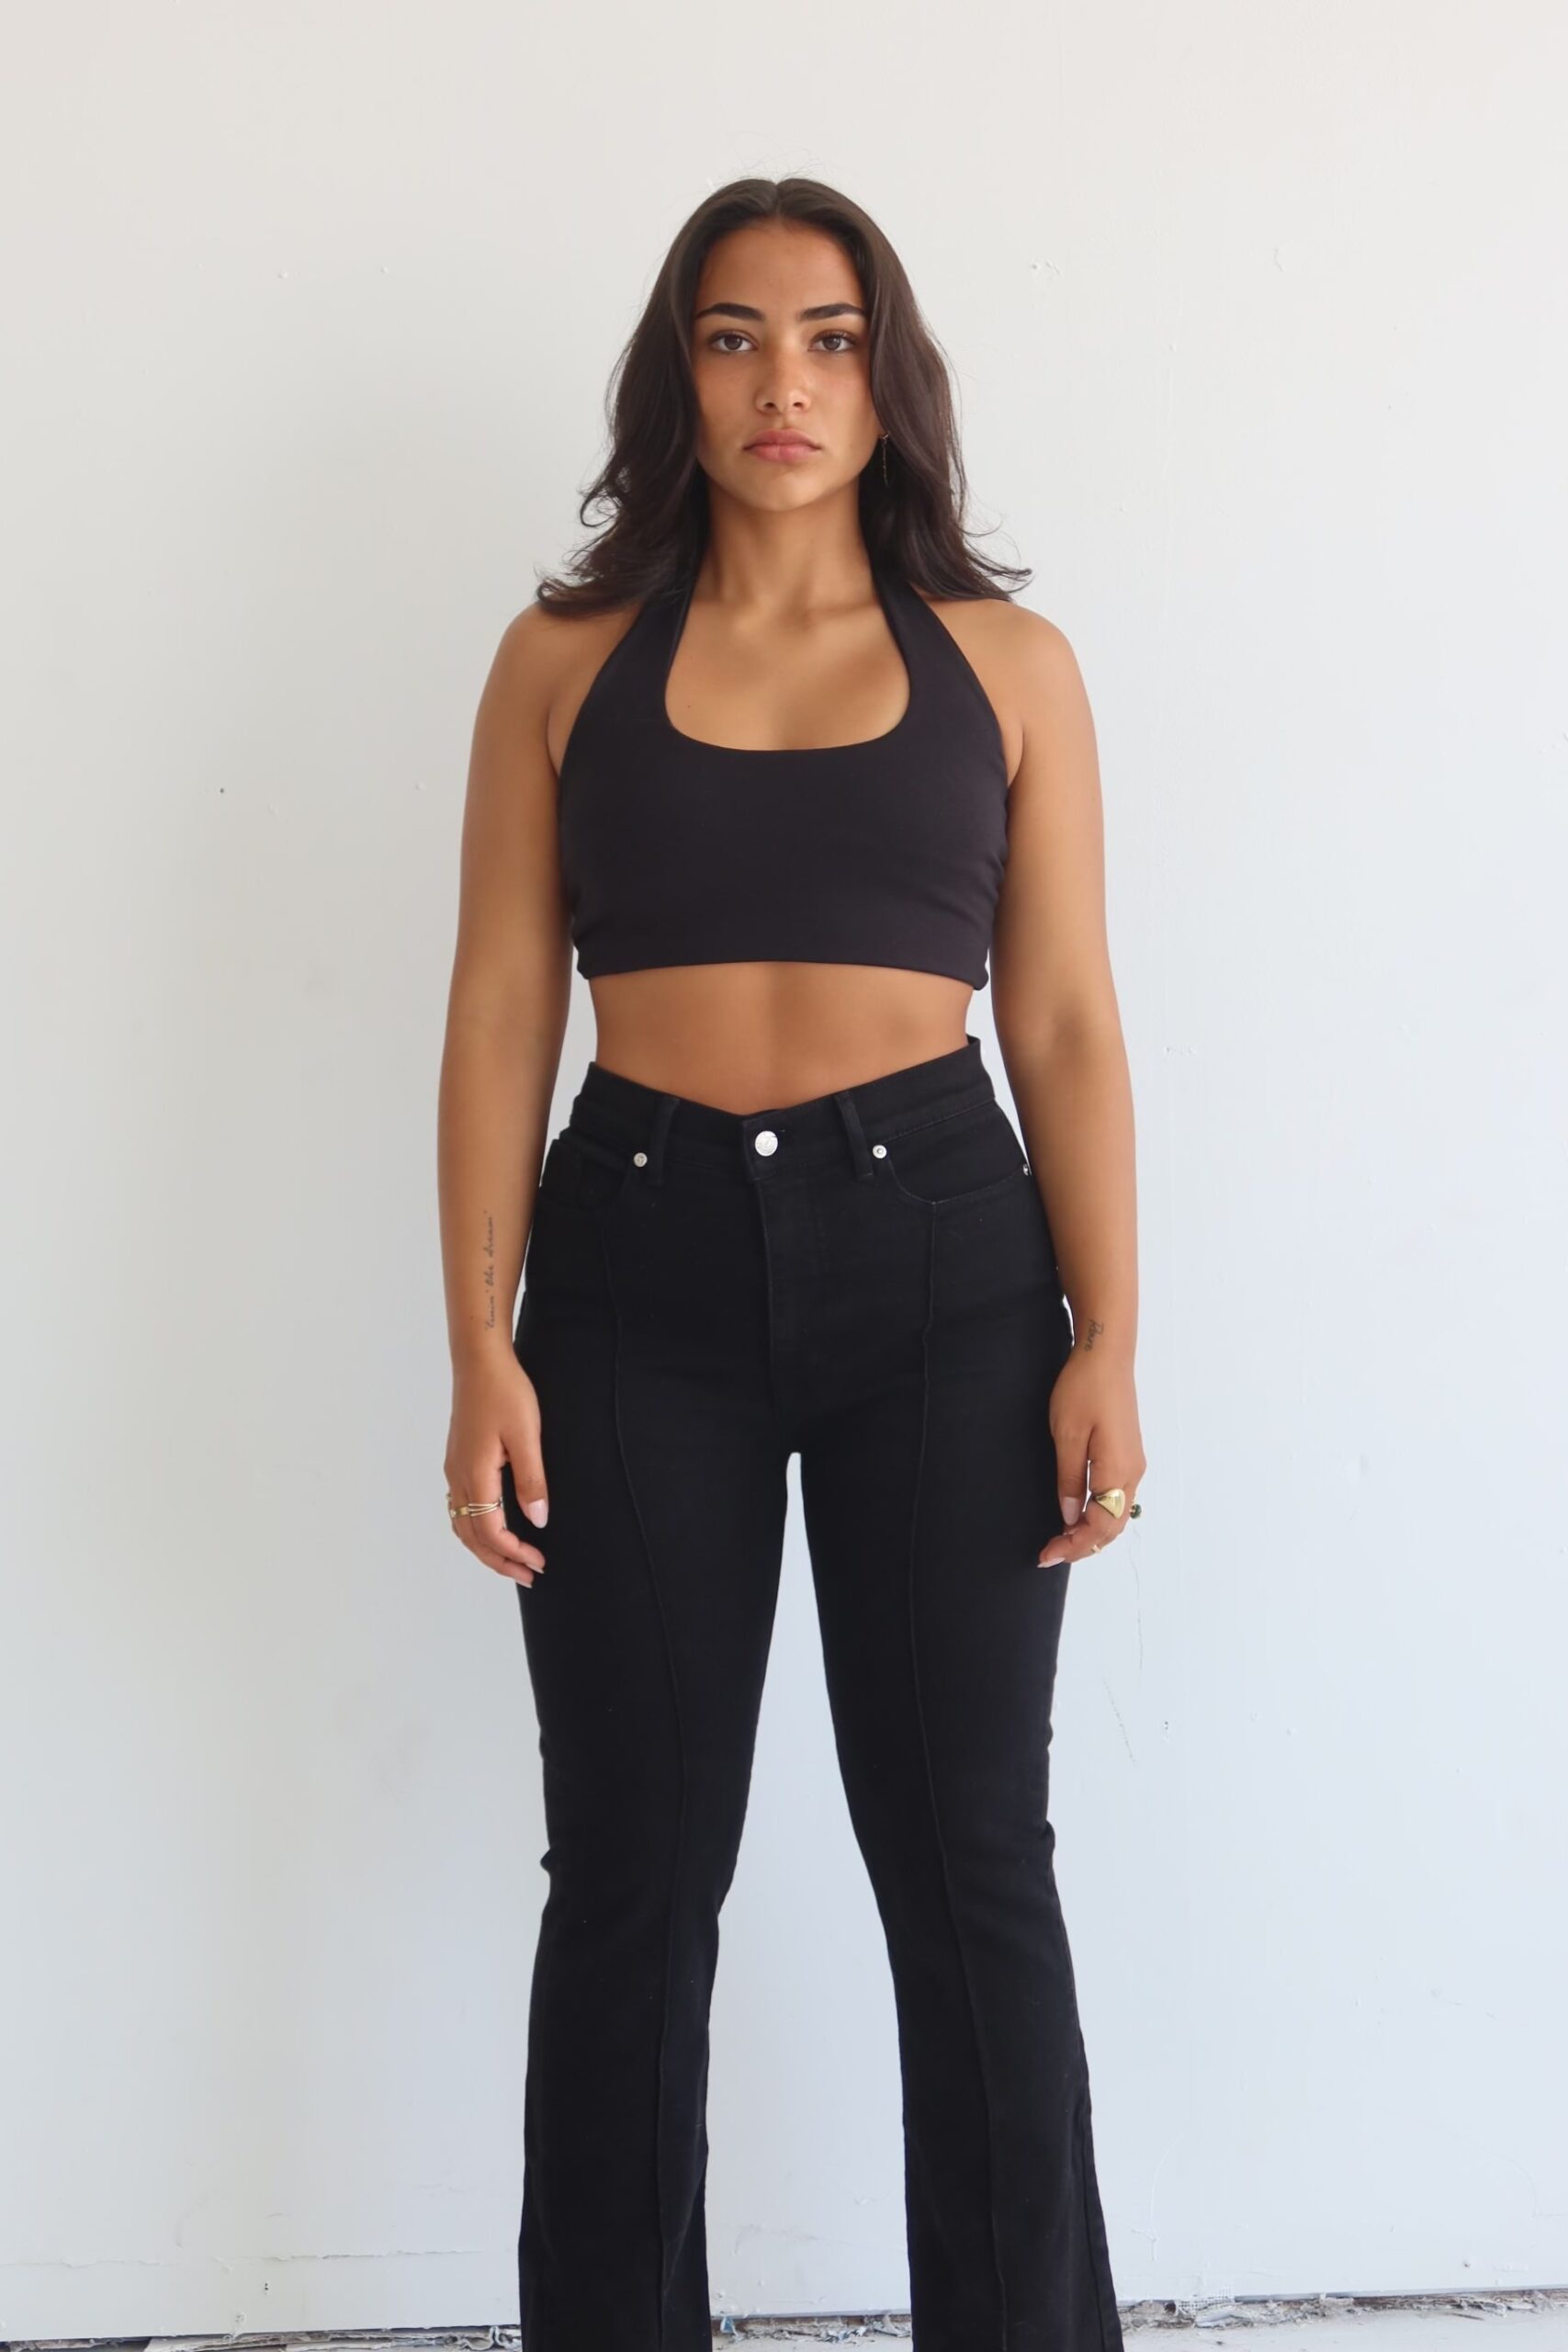 Girl standing against a white backdrop, wearing black jeans and a black halter top with her dark brown hair loosely around her shoulders.